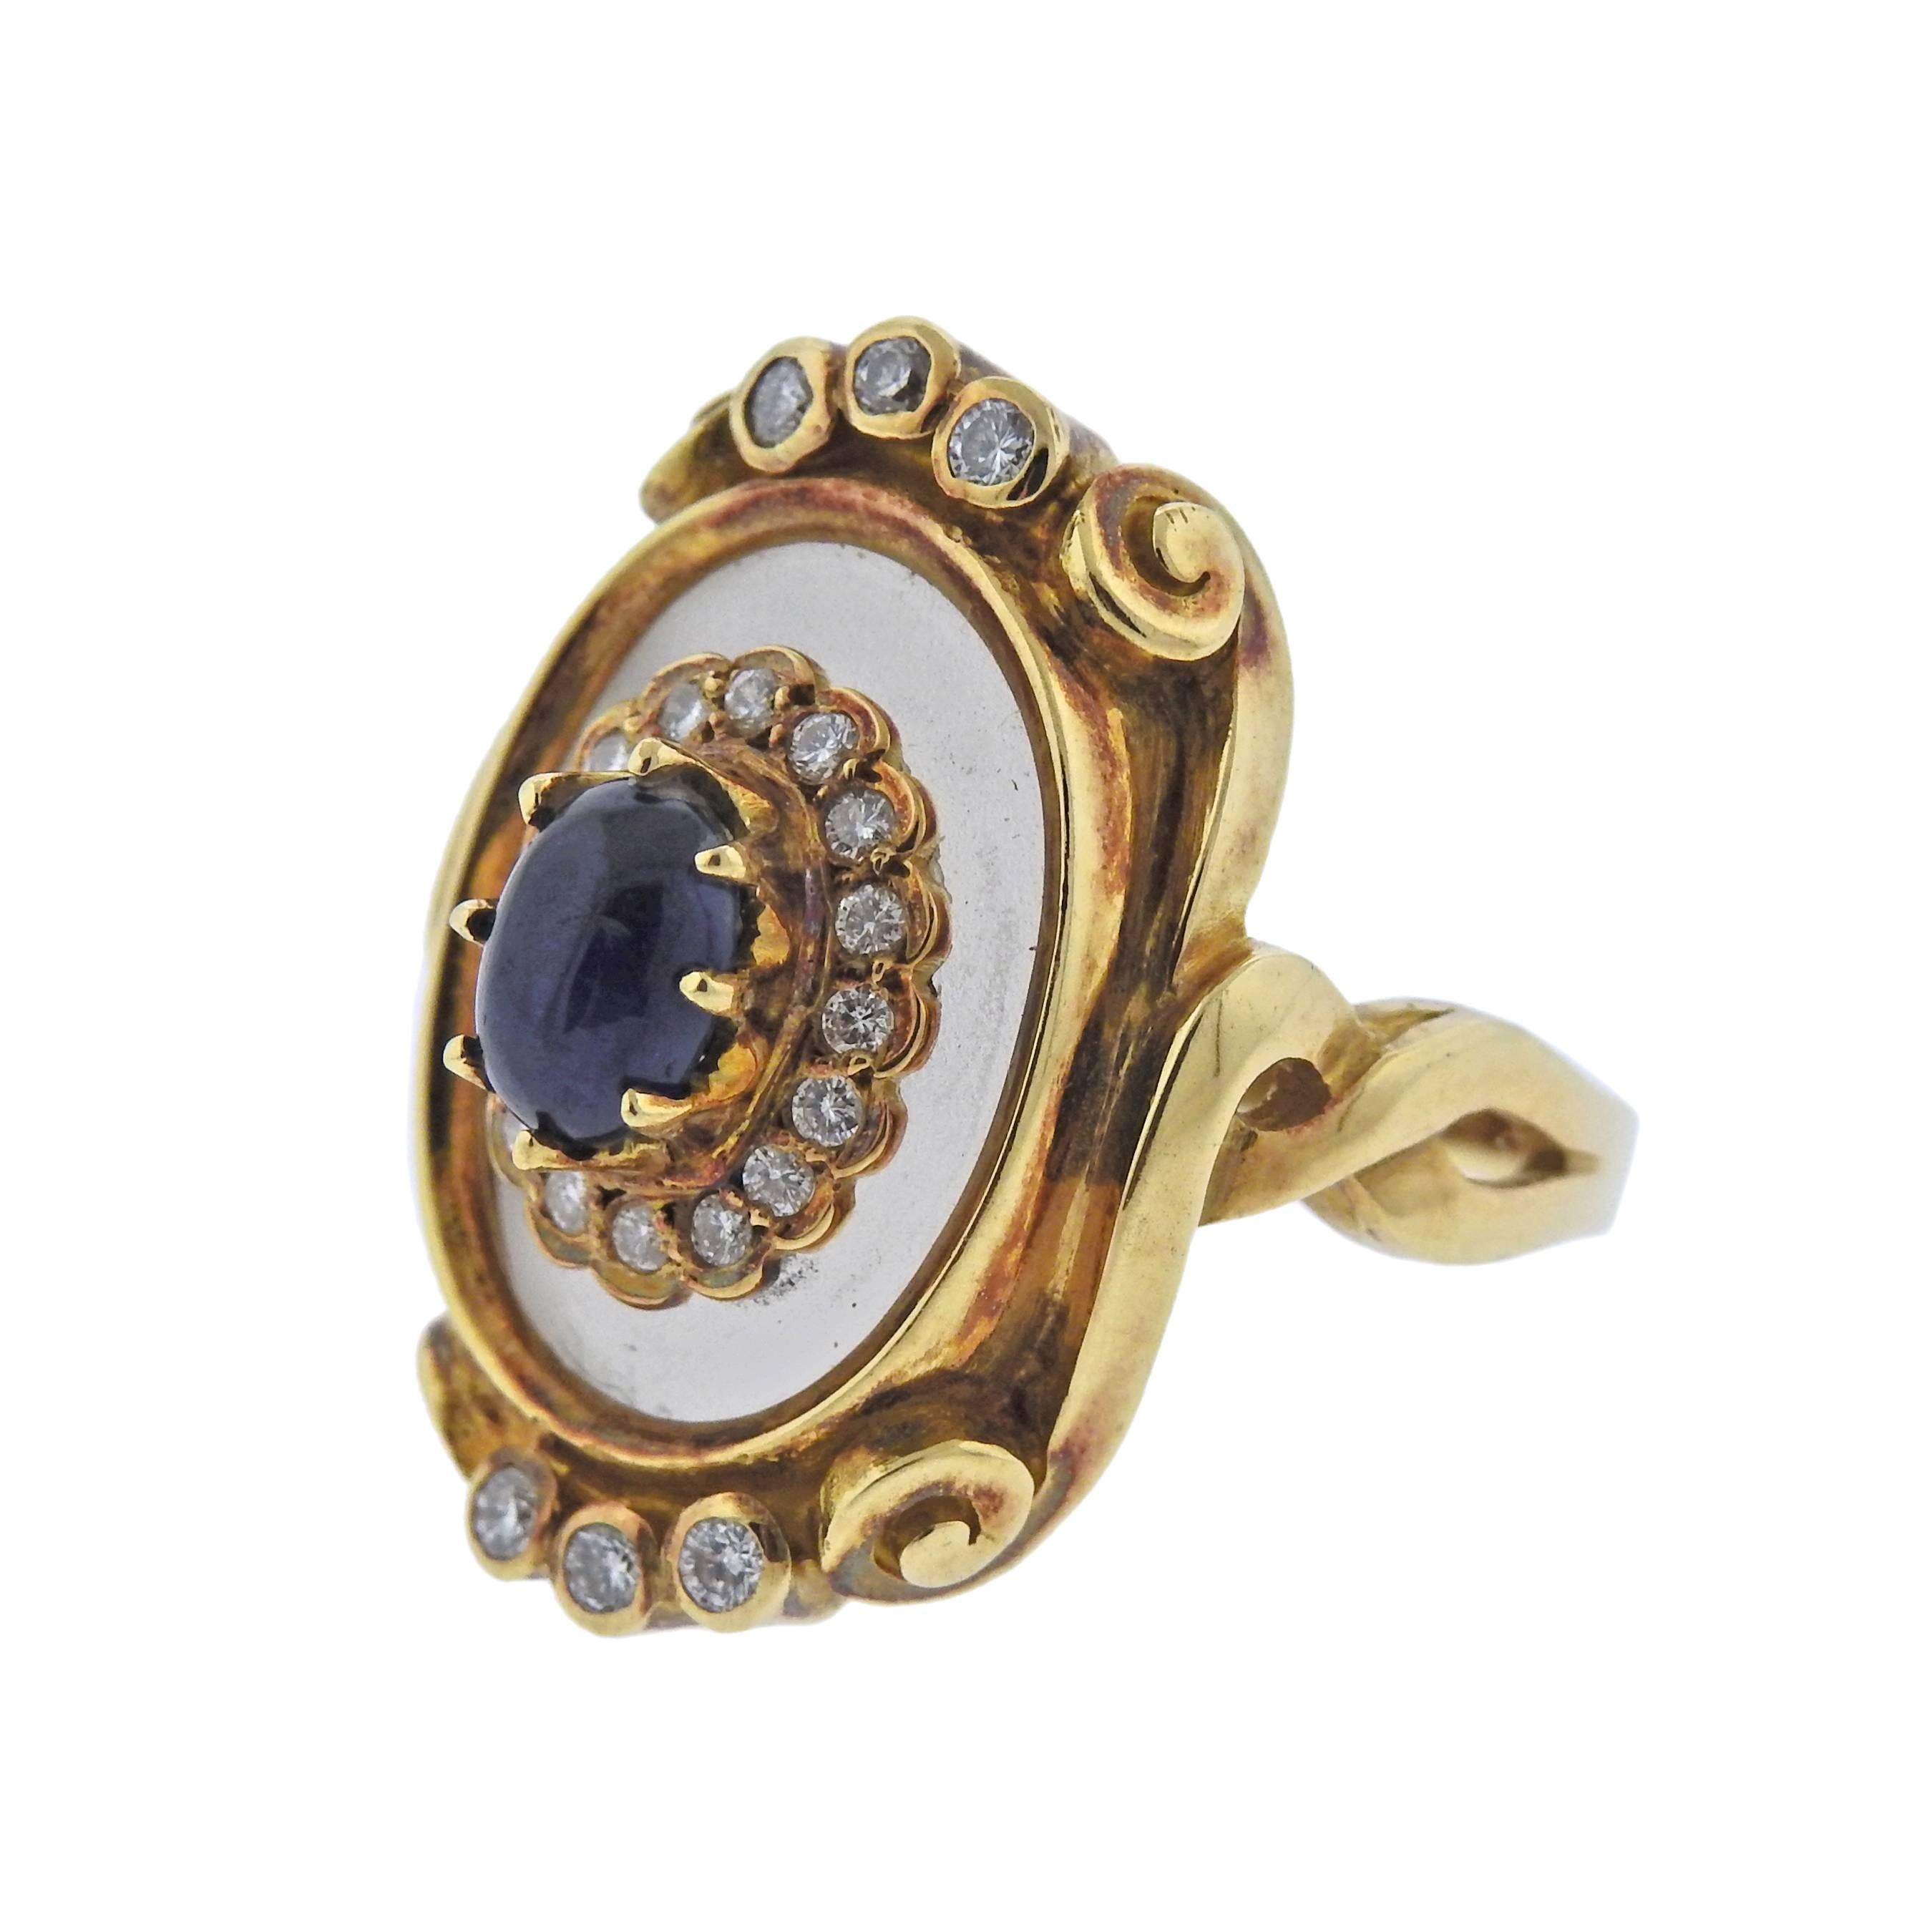 18k yellow gold ring by Greek designer Ilias Lalaounis, featuring frosted crystal top, approx. 0.24ctw in diamonds and 5mm x 7mm sapphire cabochon. Ring size - 7, ring top - 25mm x 18mm, weighs 12.3 grams. Marked: 750, A21, Maker's mark, Greece.